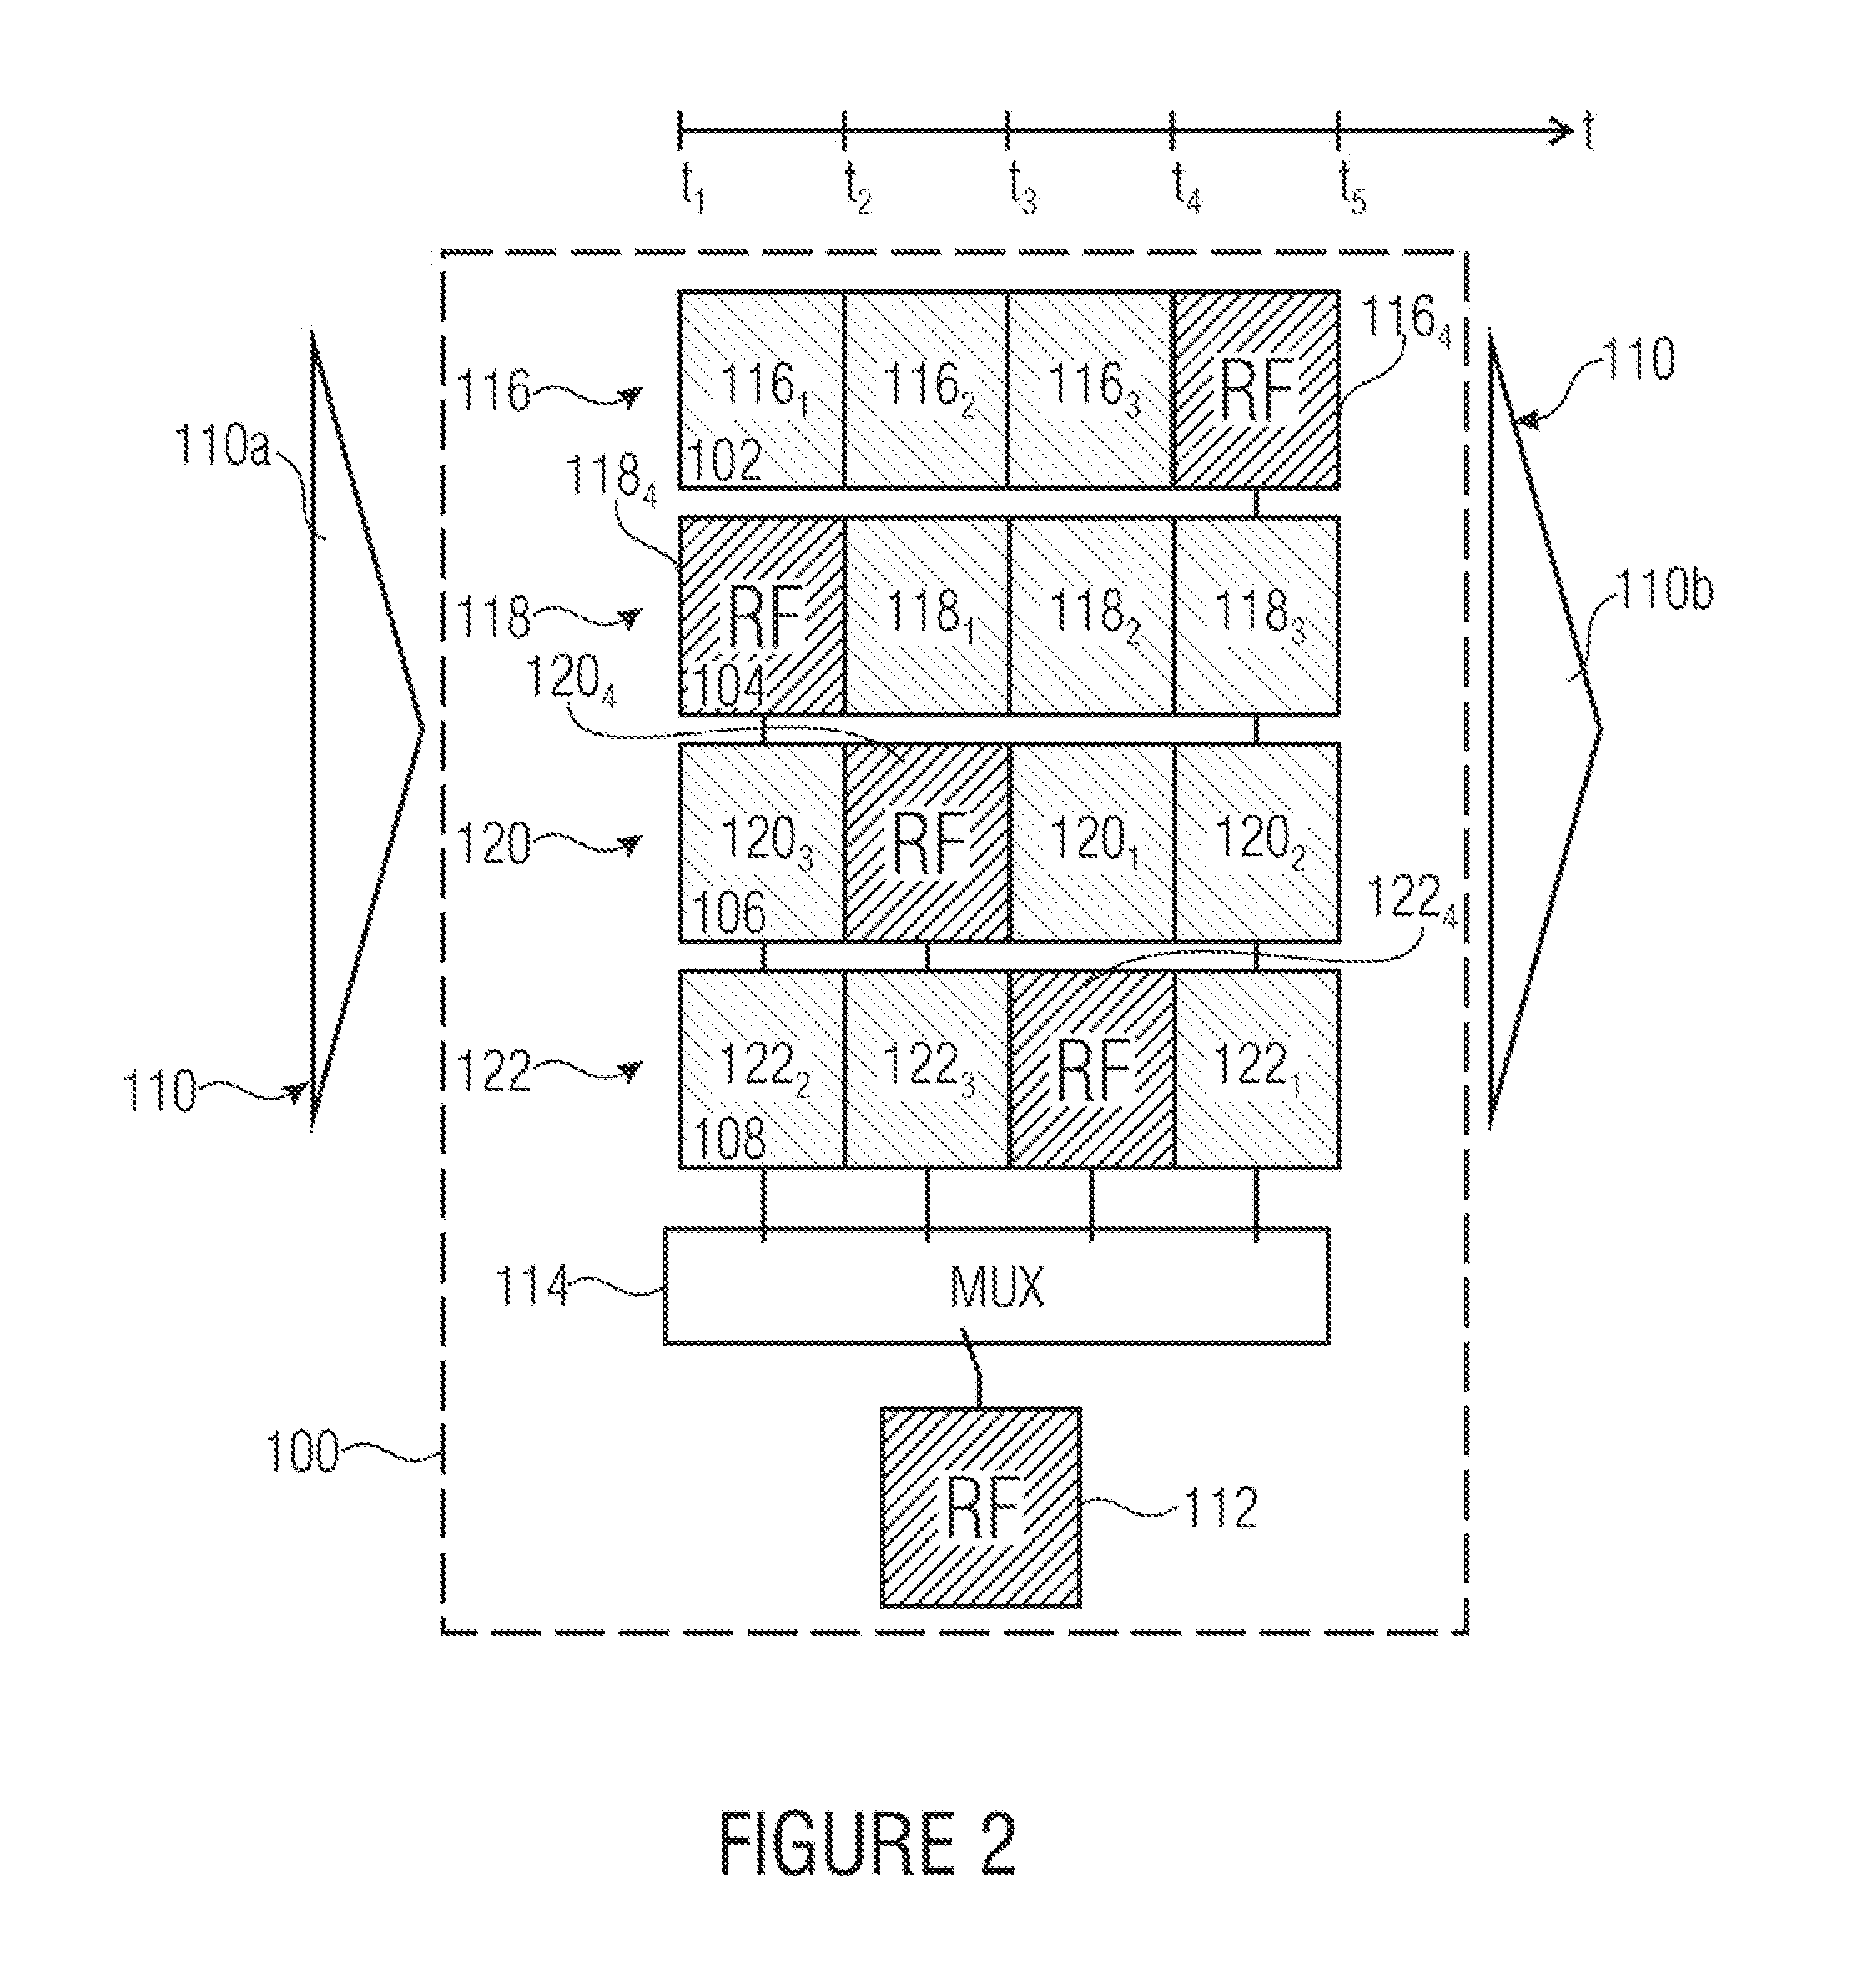 Method of sharing a test resource at a plurality of test sites, automated test equipment, handler for loading and unloading devices to be tested and test system